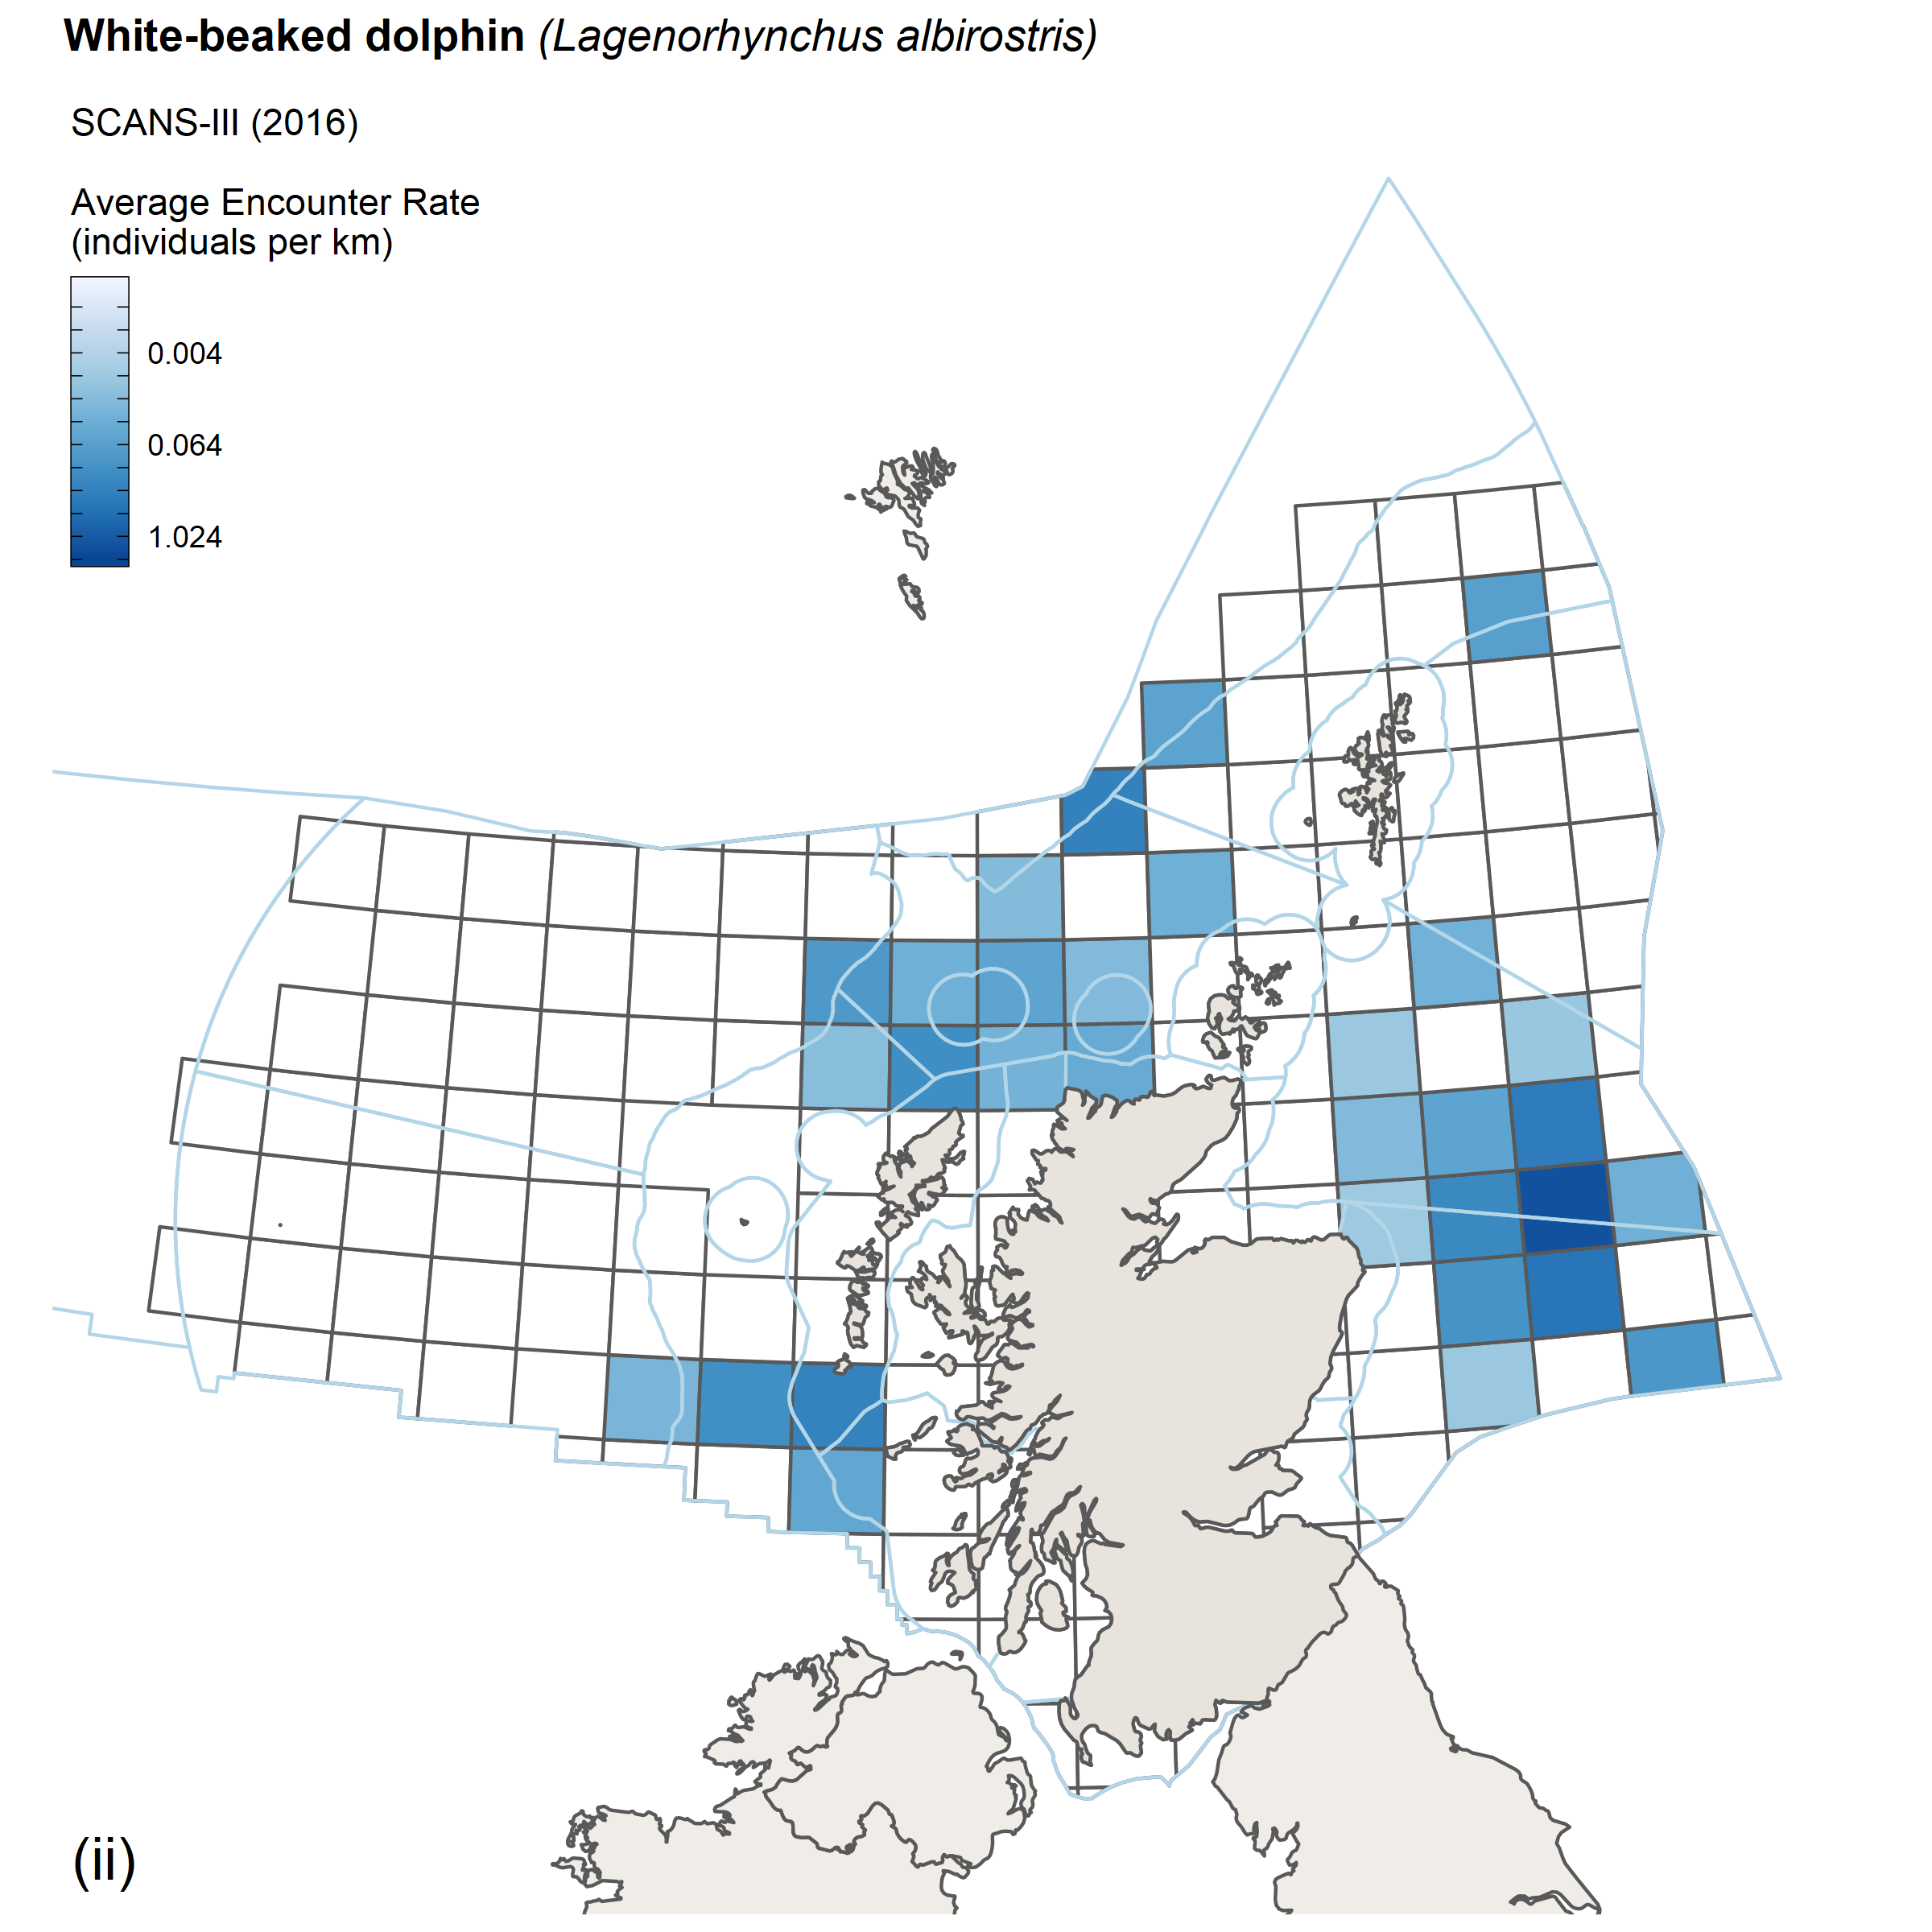 Encounter rates for white-beaked dolphin from SCANS III